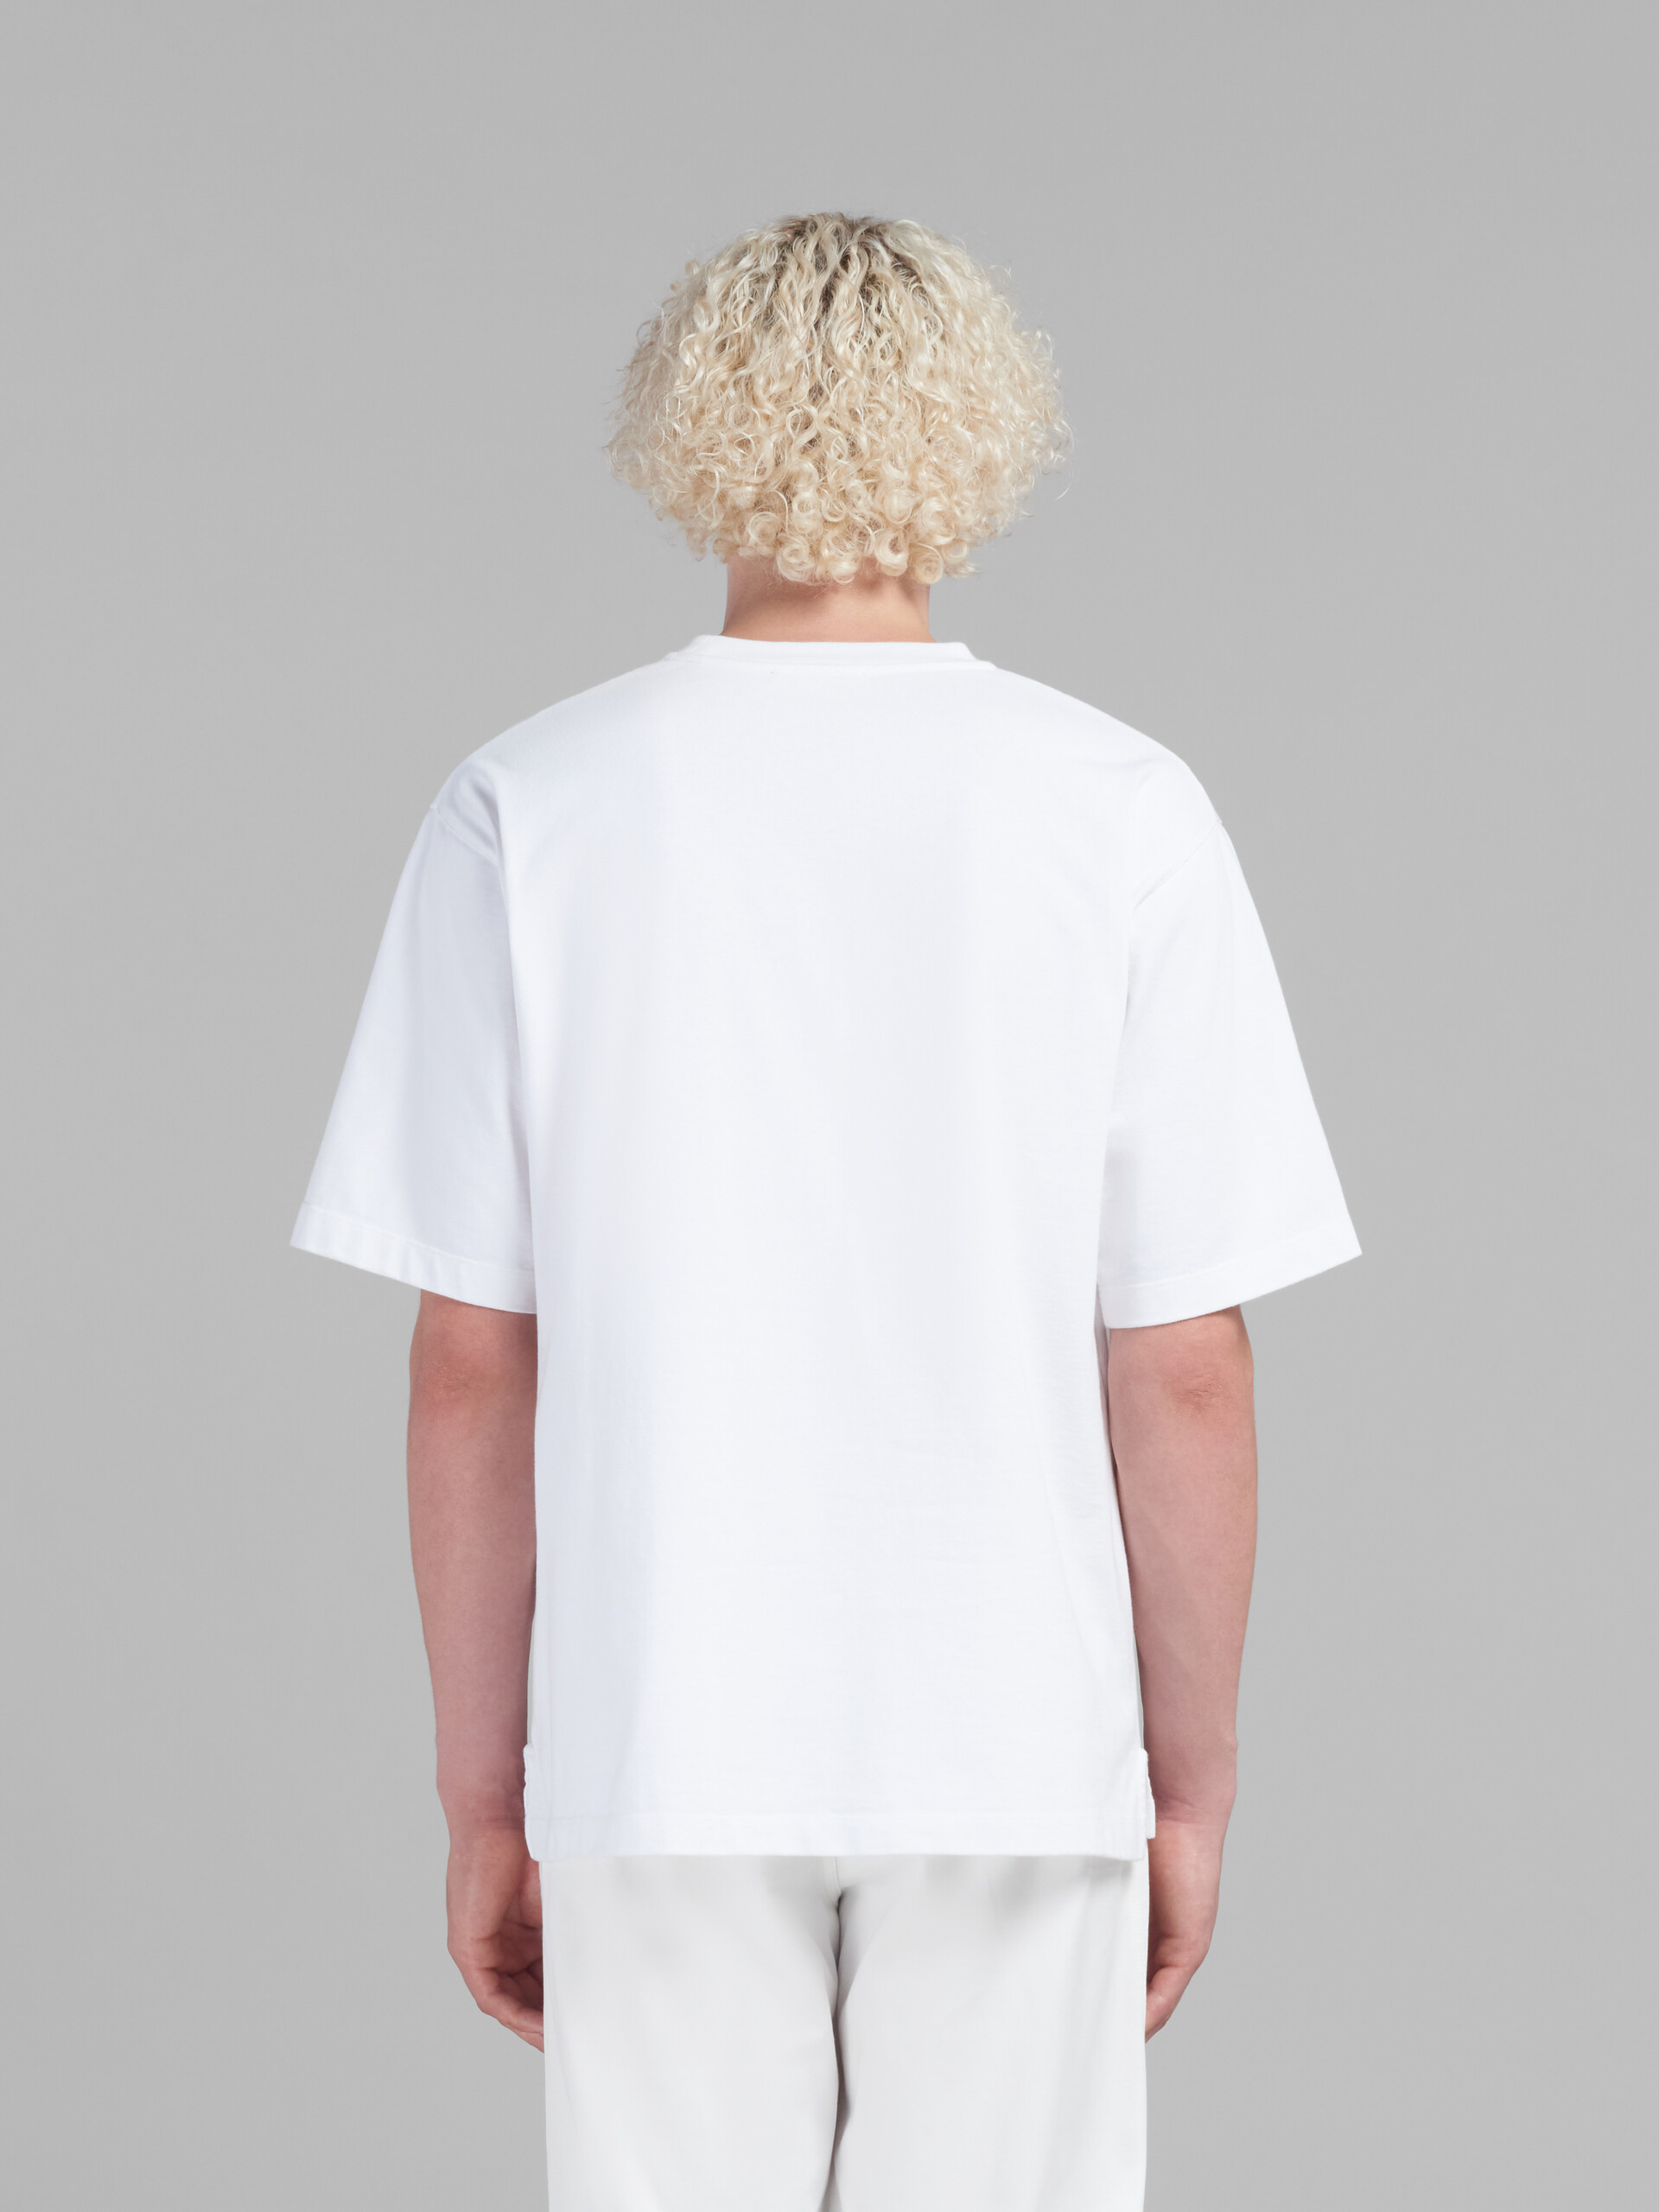 Blue organic cotton oversized T-shirt with Marni patches - T-shirts - Image 3